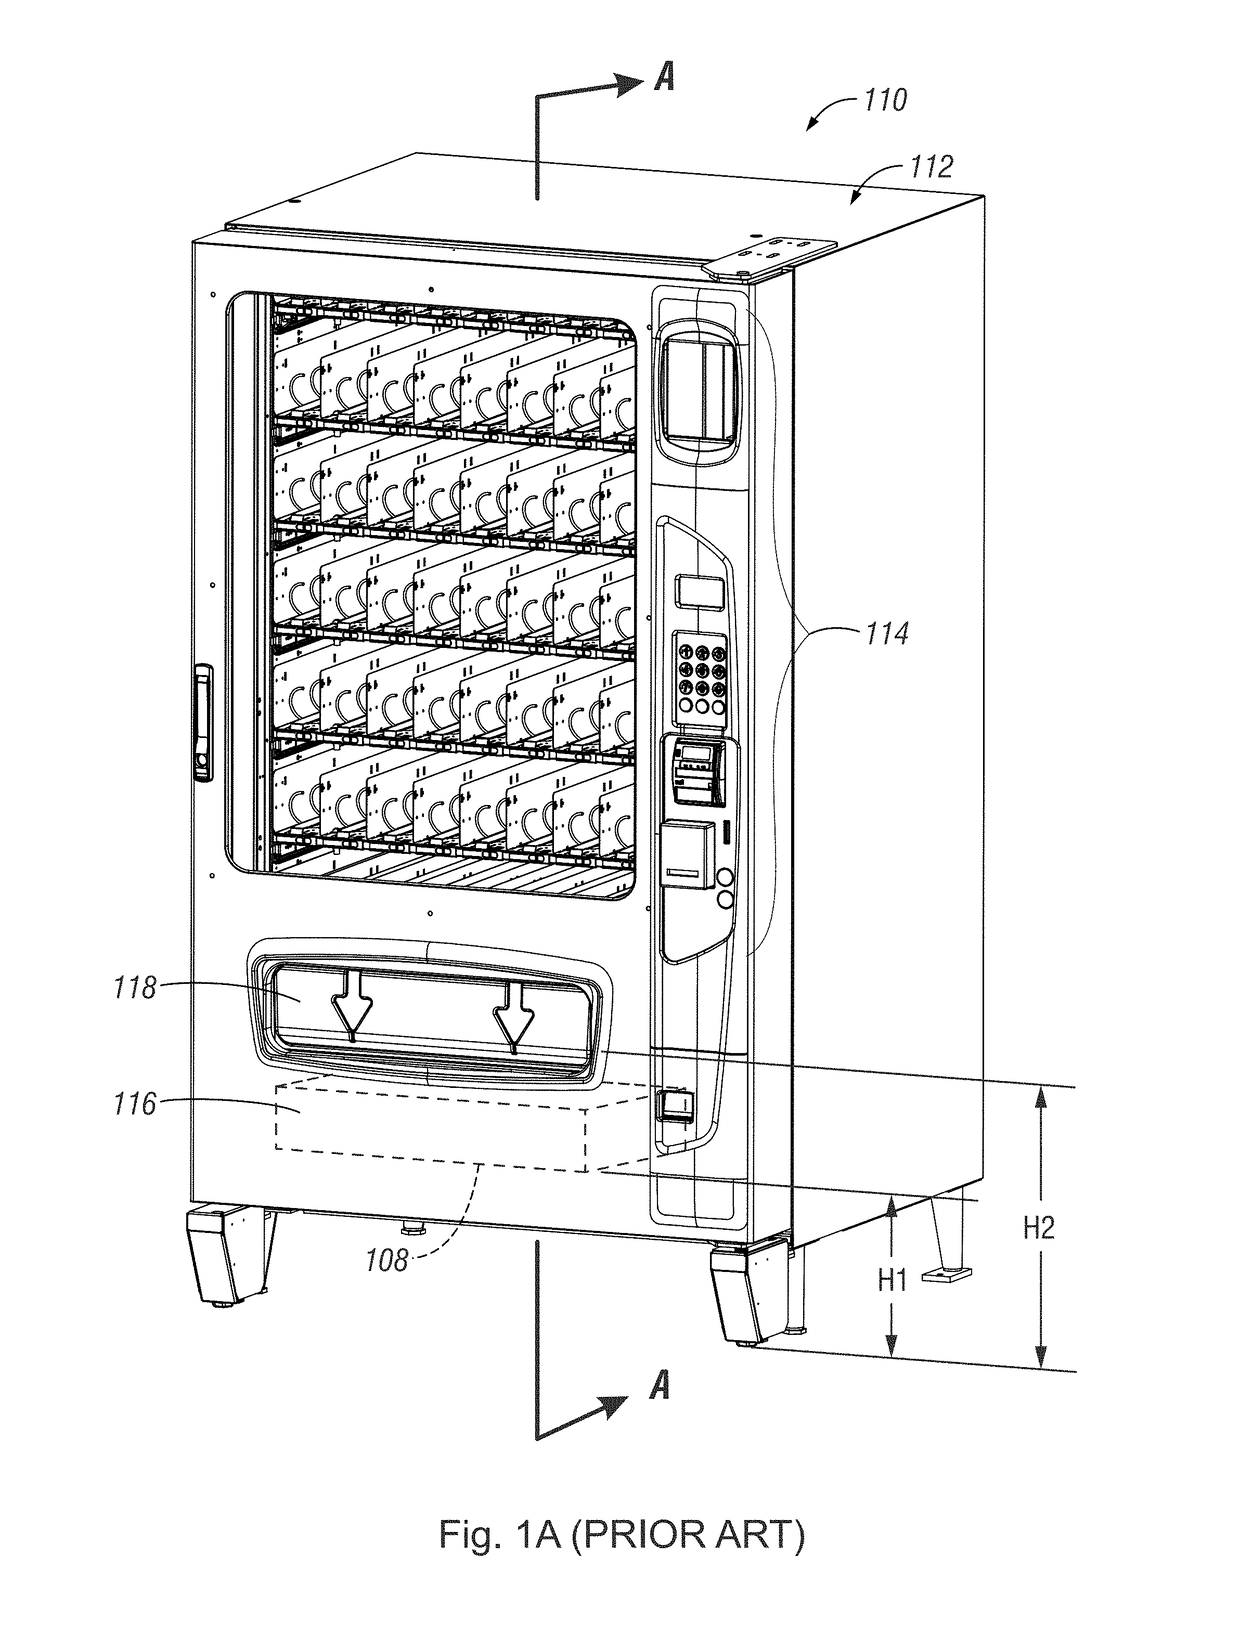 Mechanical lift for delivery bins in vending machines